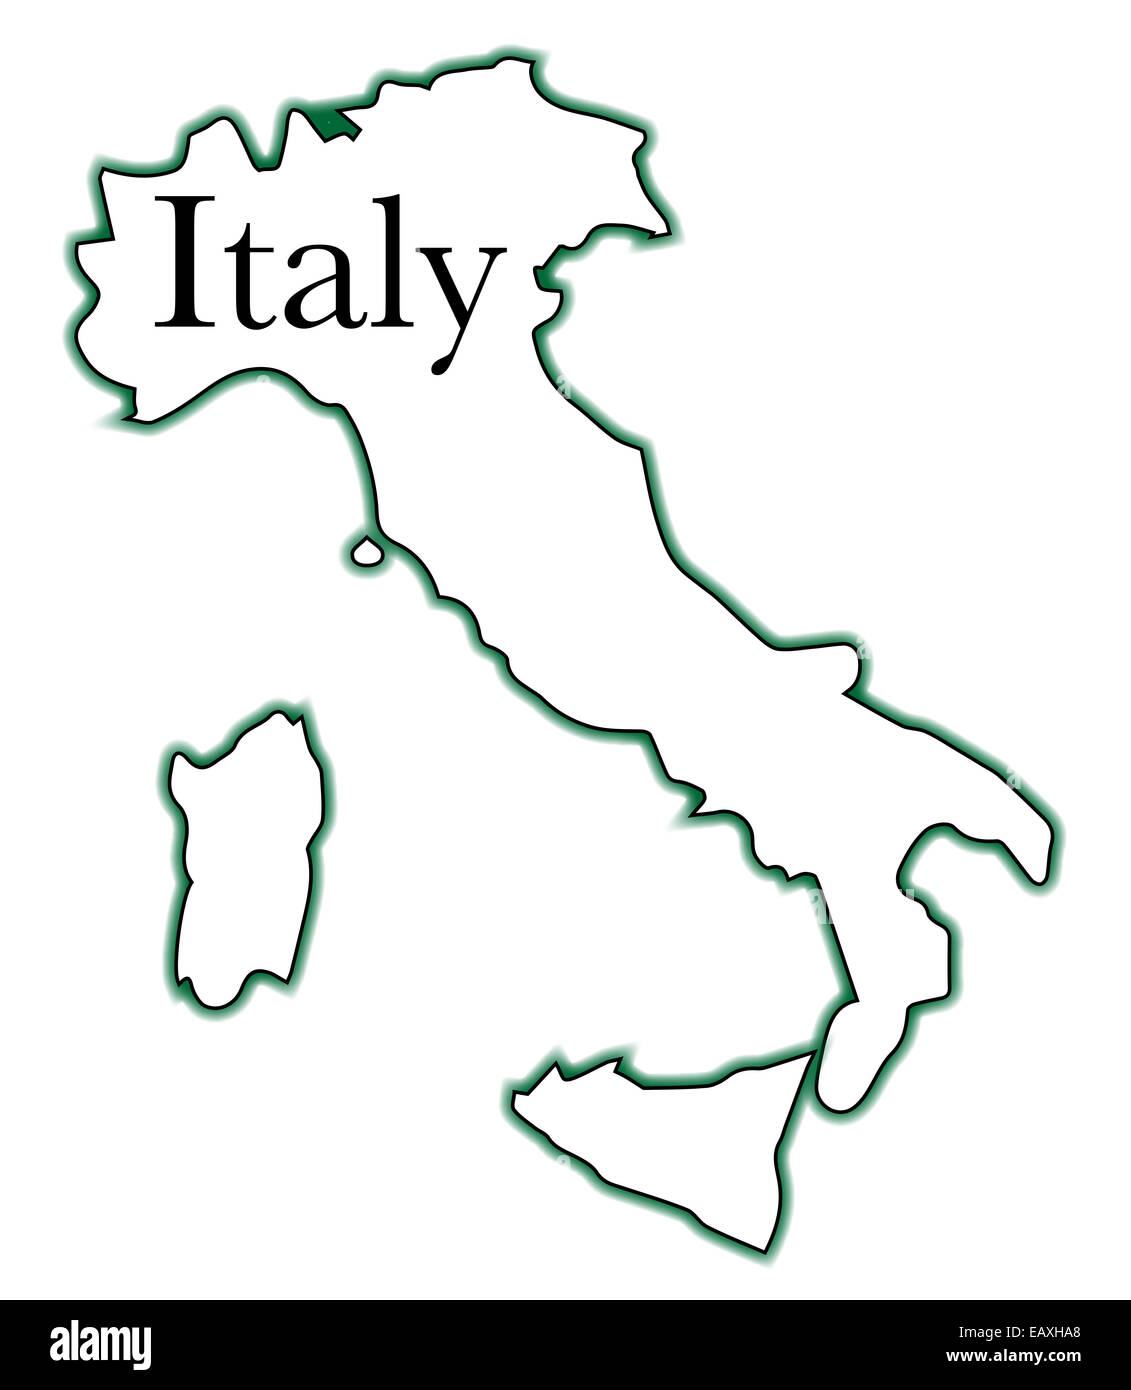 italy-map-outline-free-blank-vector-map-webvectormaps-in-2021-map